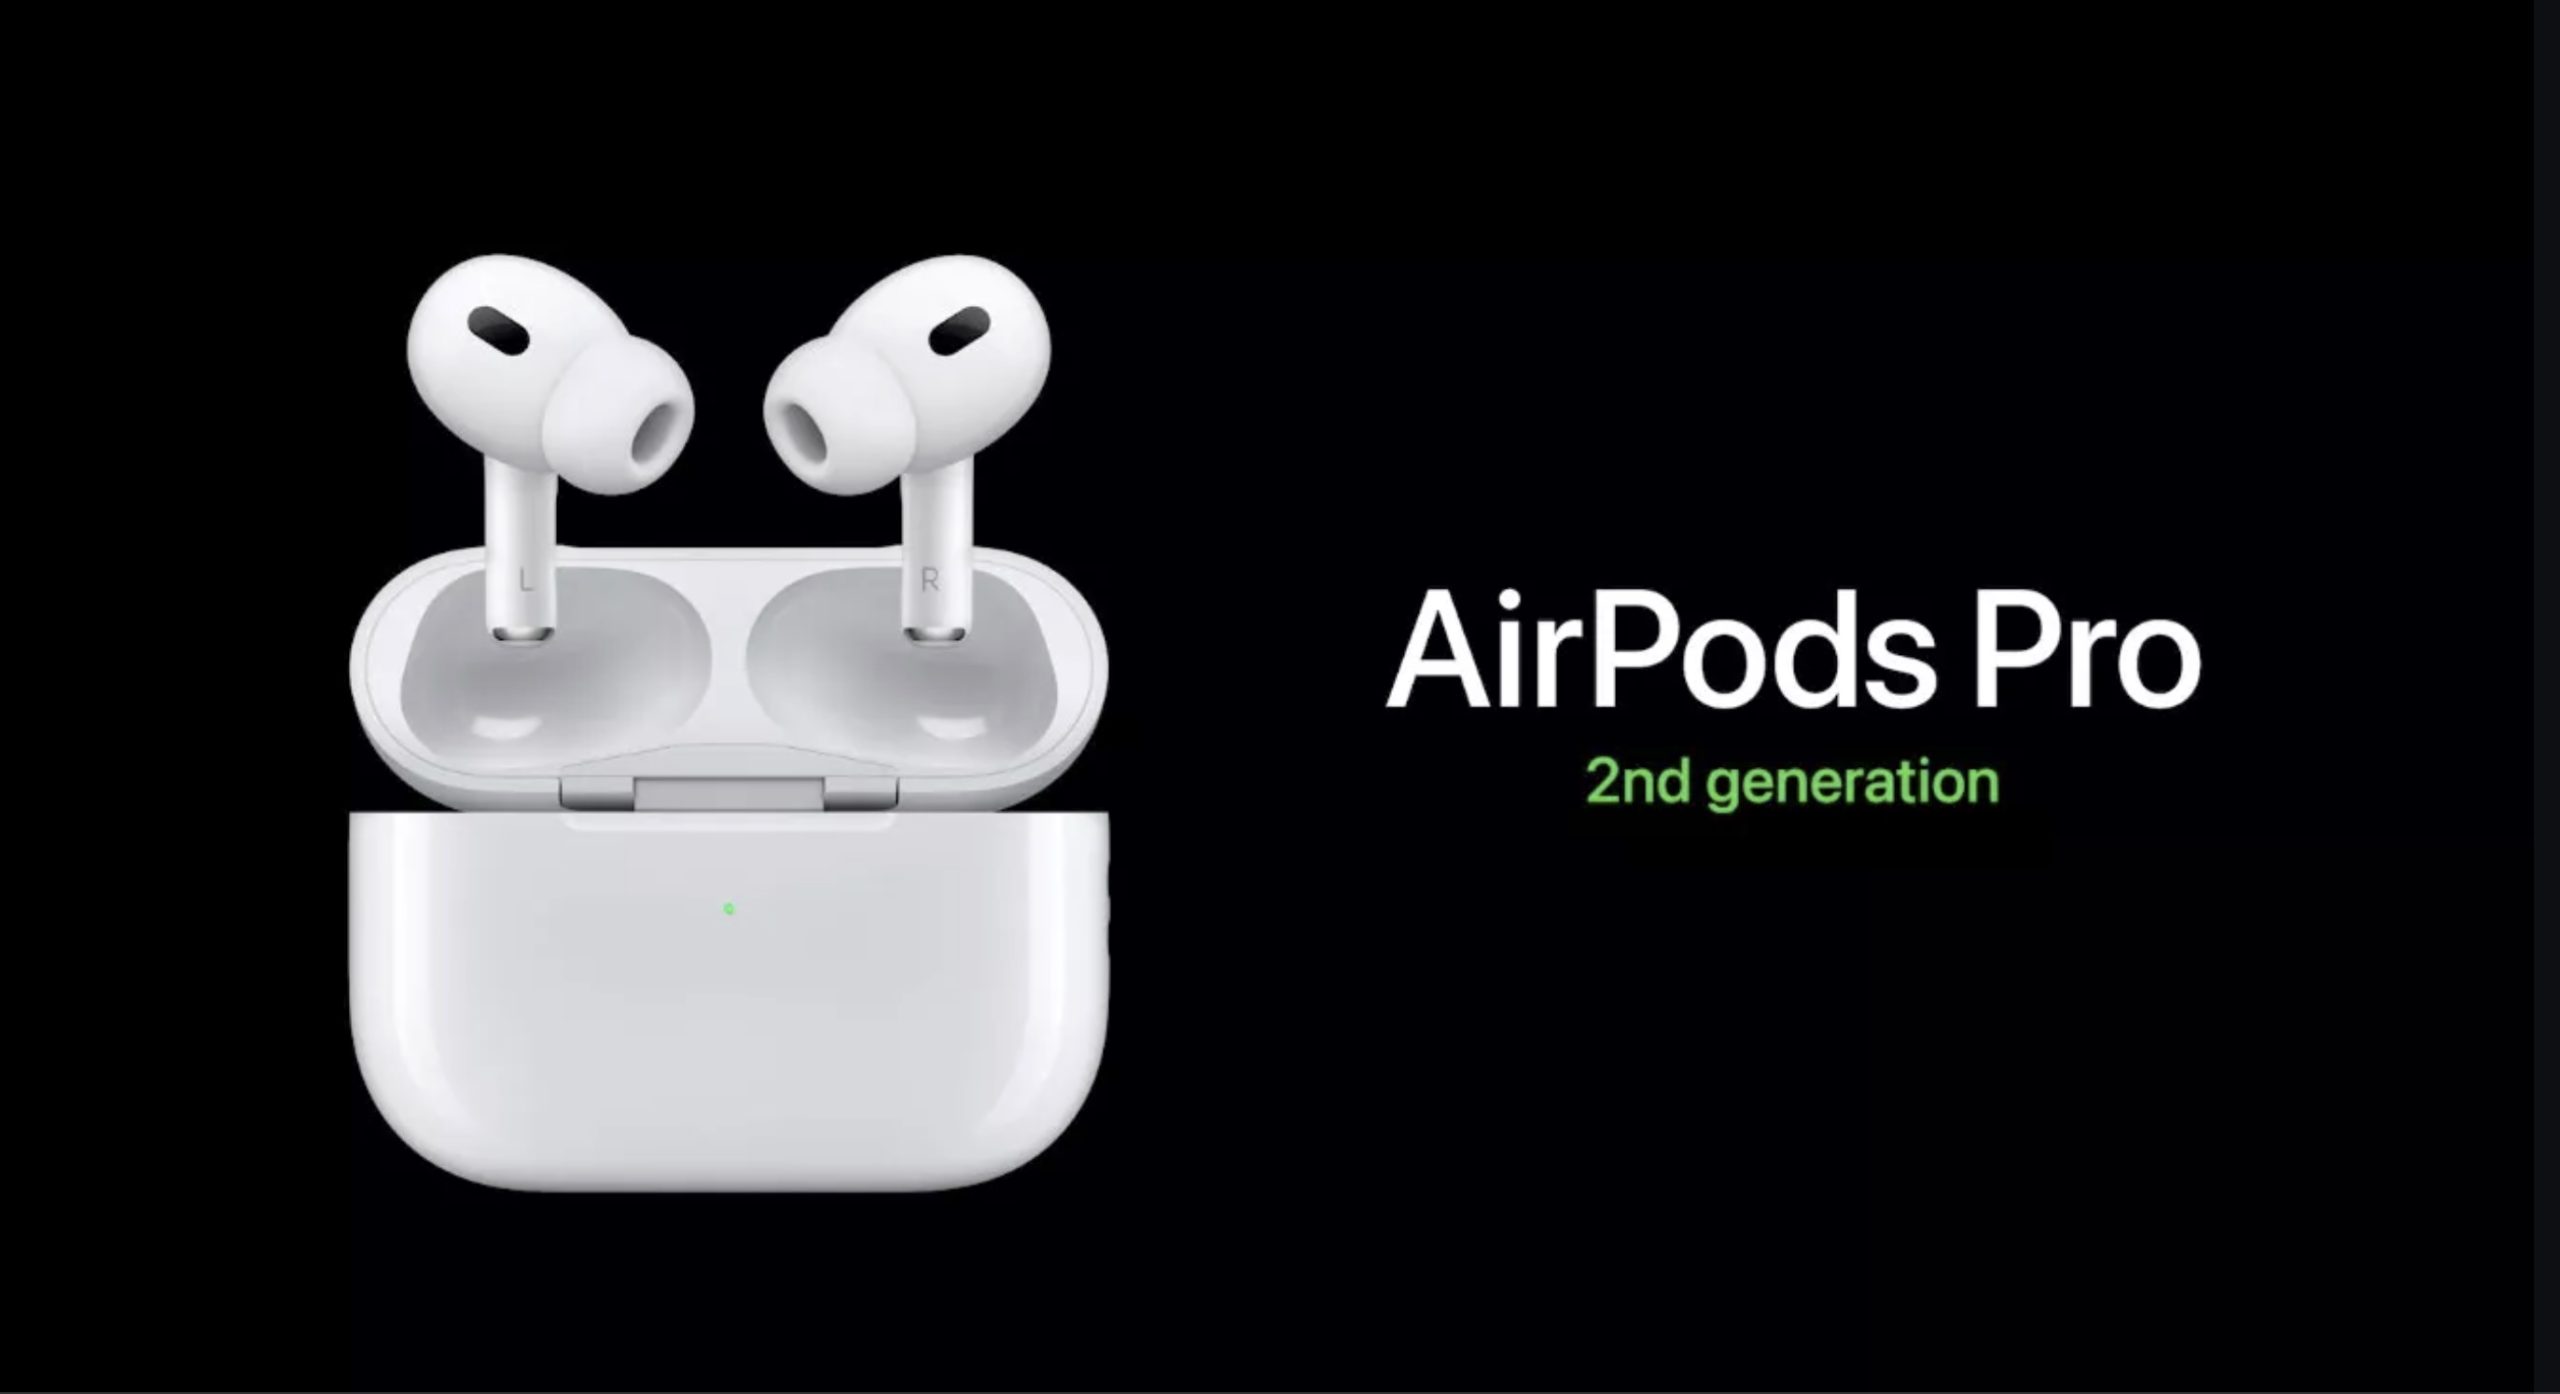 AirPods Pro 2nd Generation launched at the 'Far Out' event